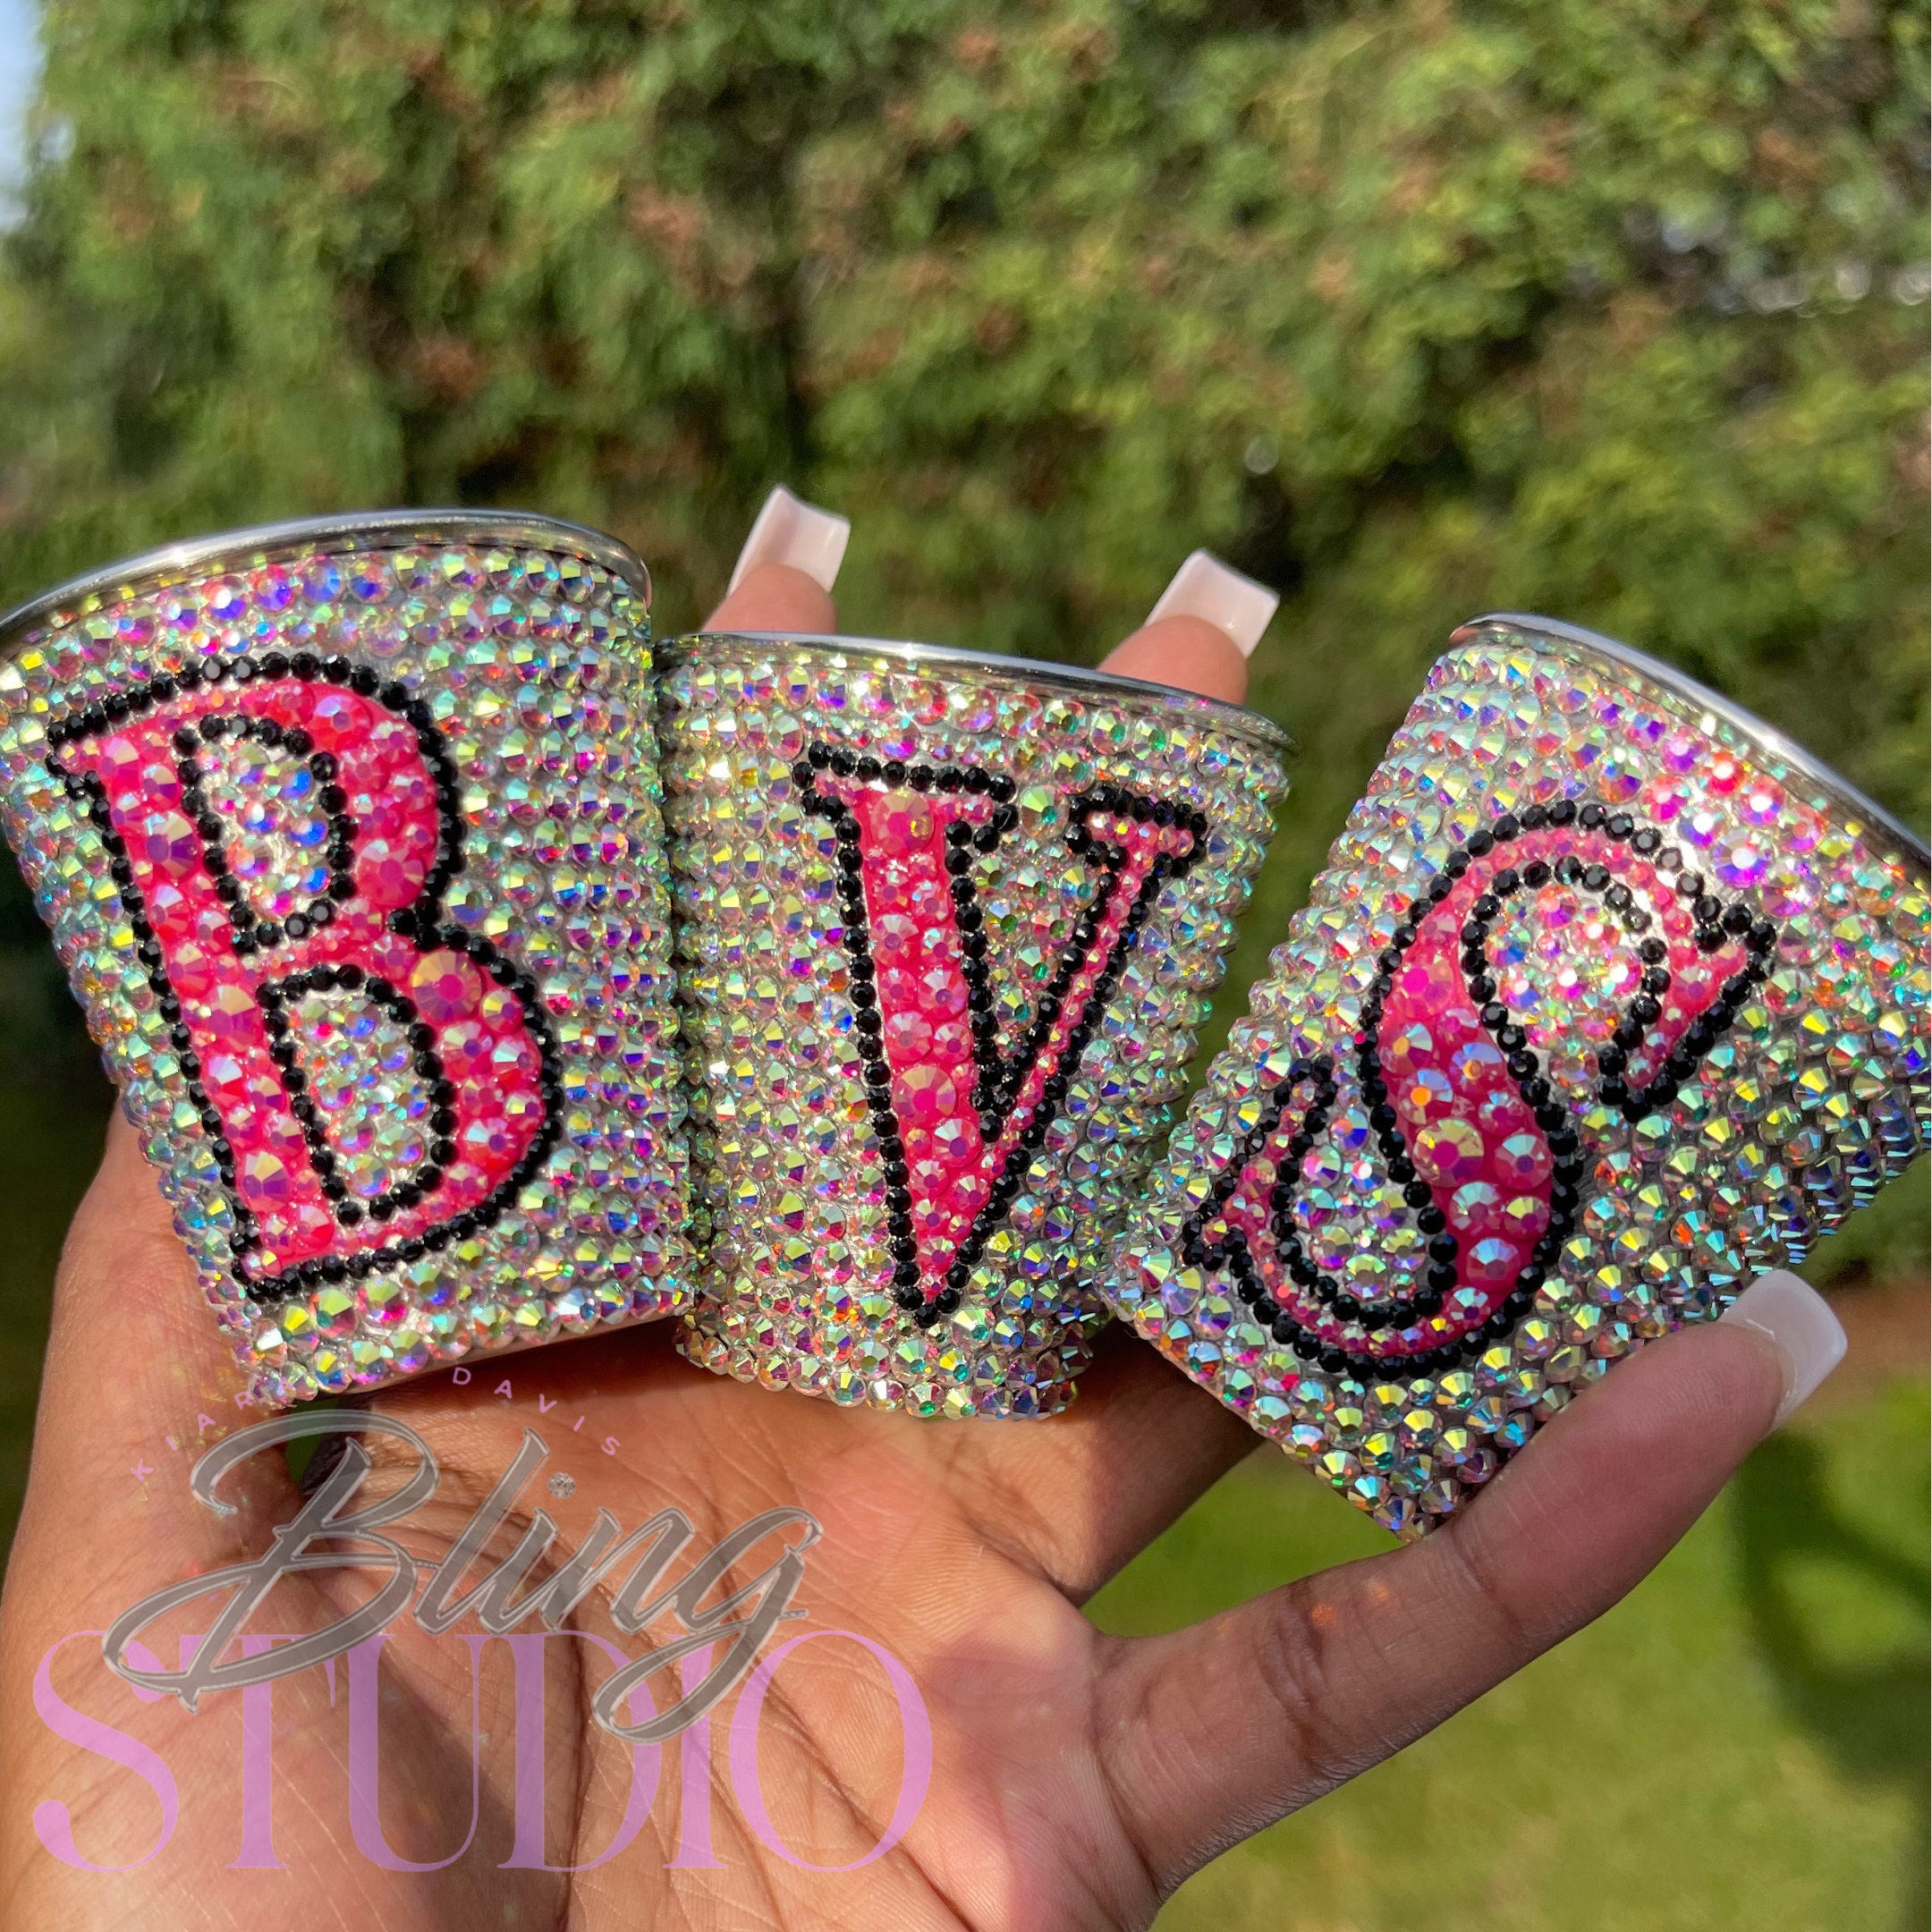 Bling Bling – Party Favors from NY Party Works